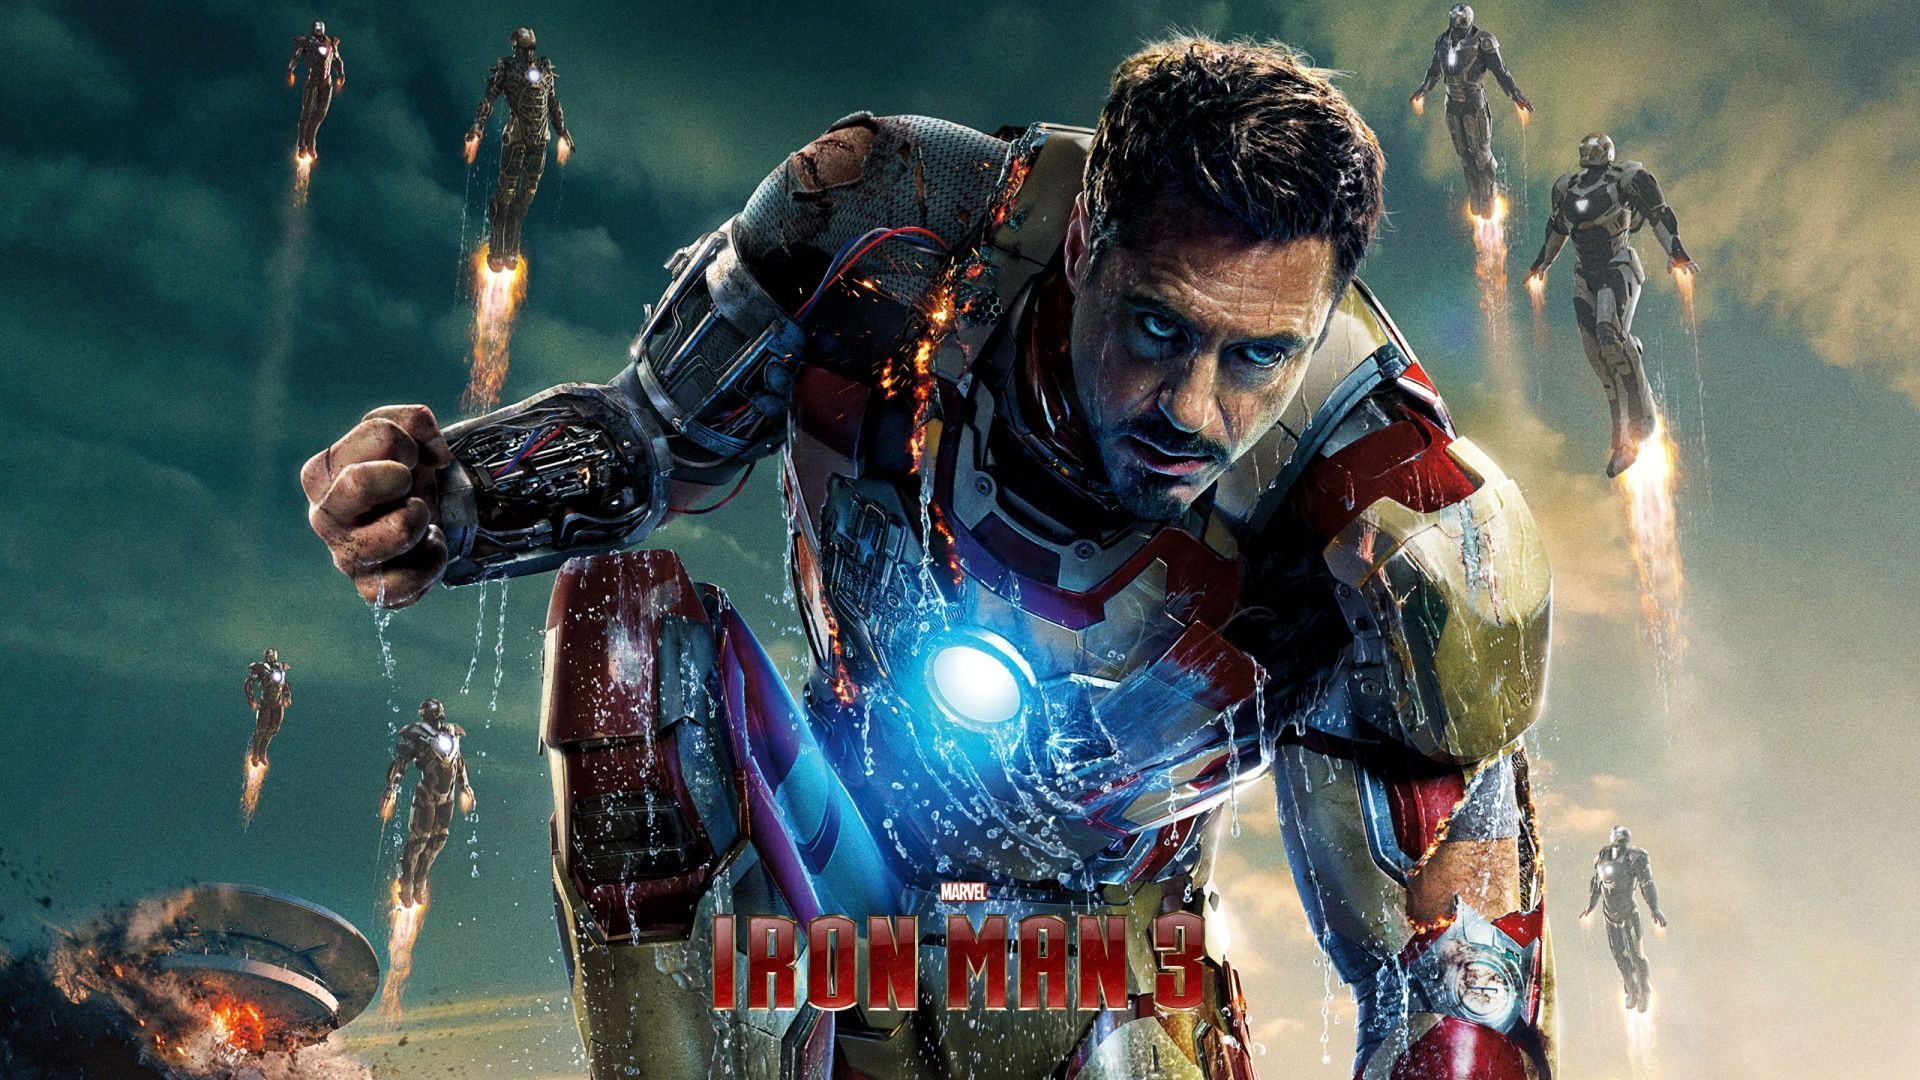 Iron Man 3 Movie Wallpapers HD Backgrounds